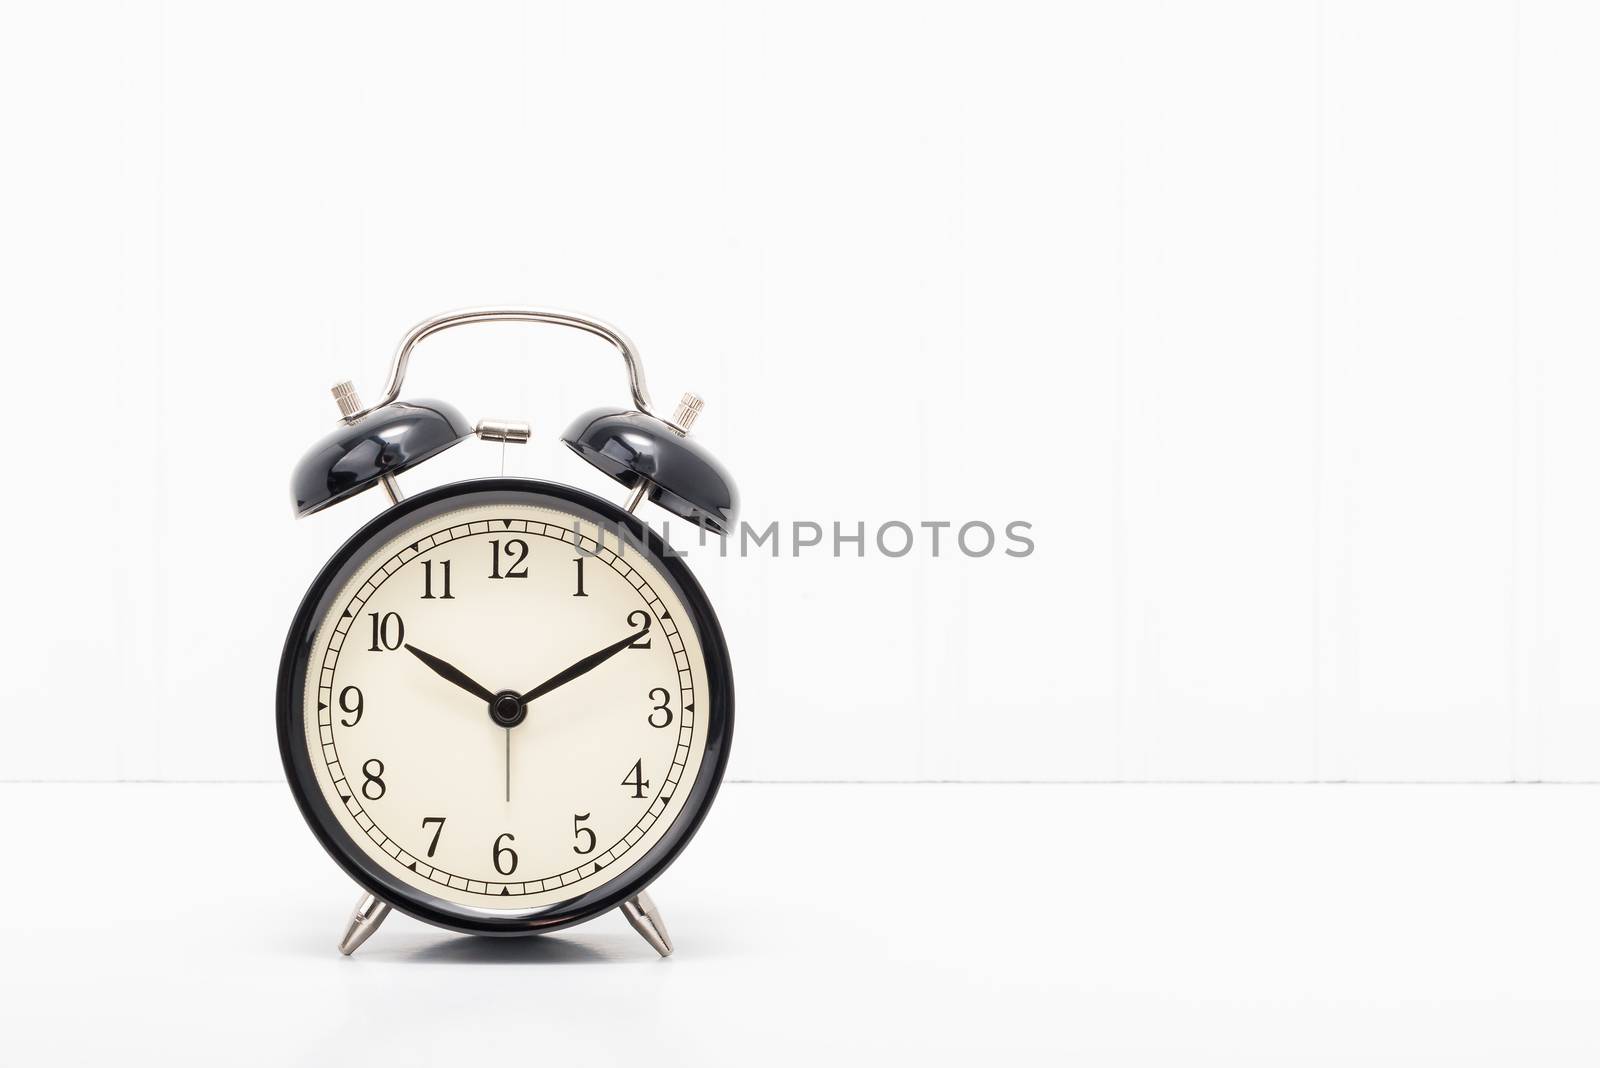 Retro style alarm clock on a simple background with ample copy space.